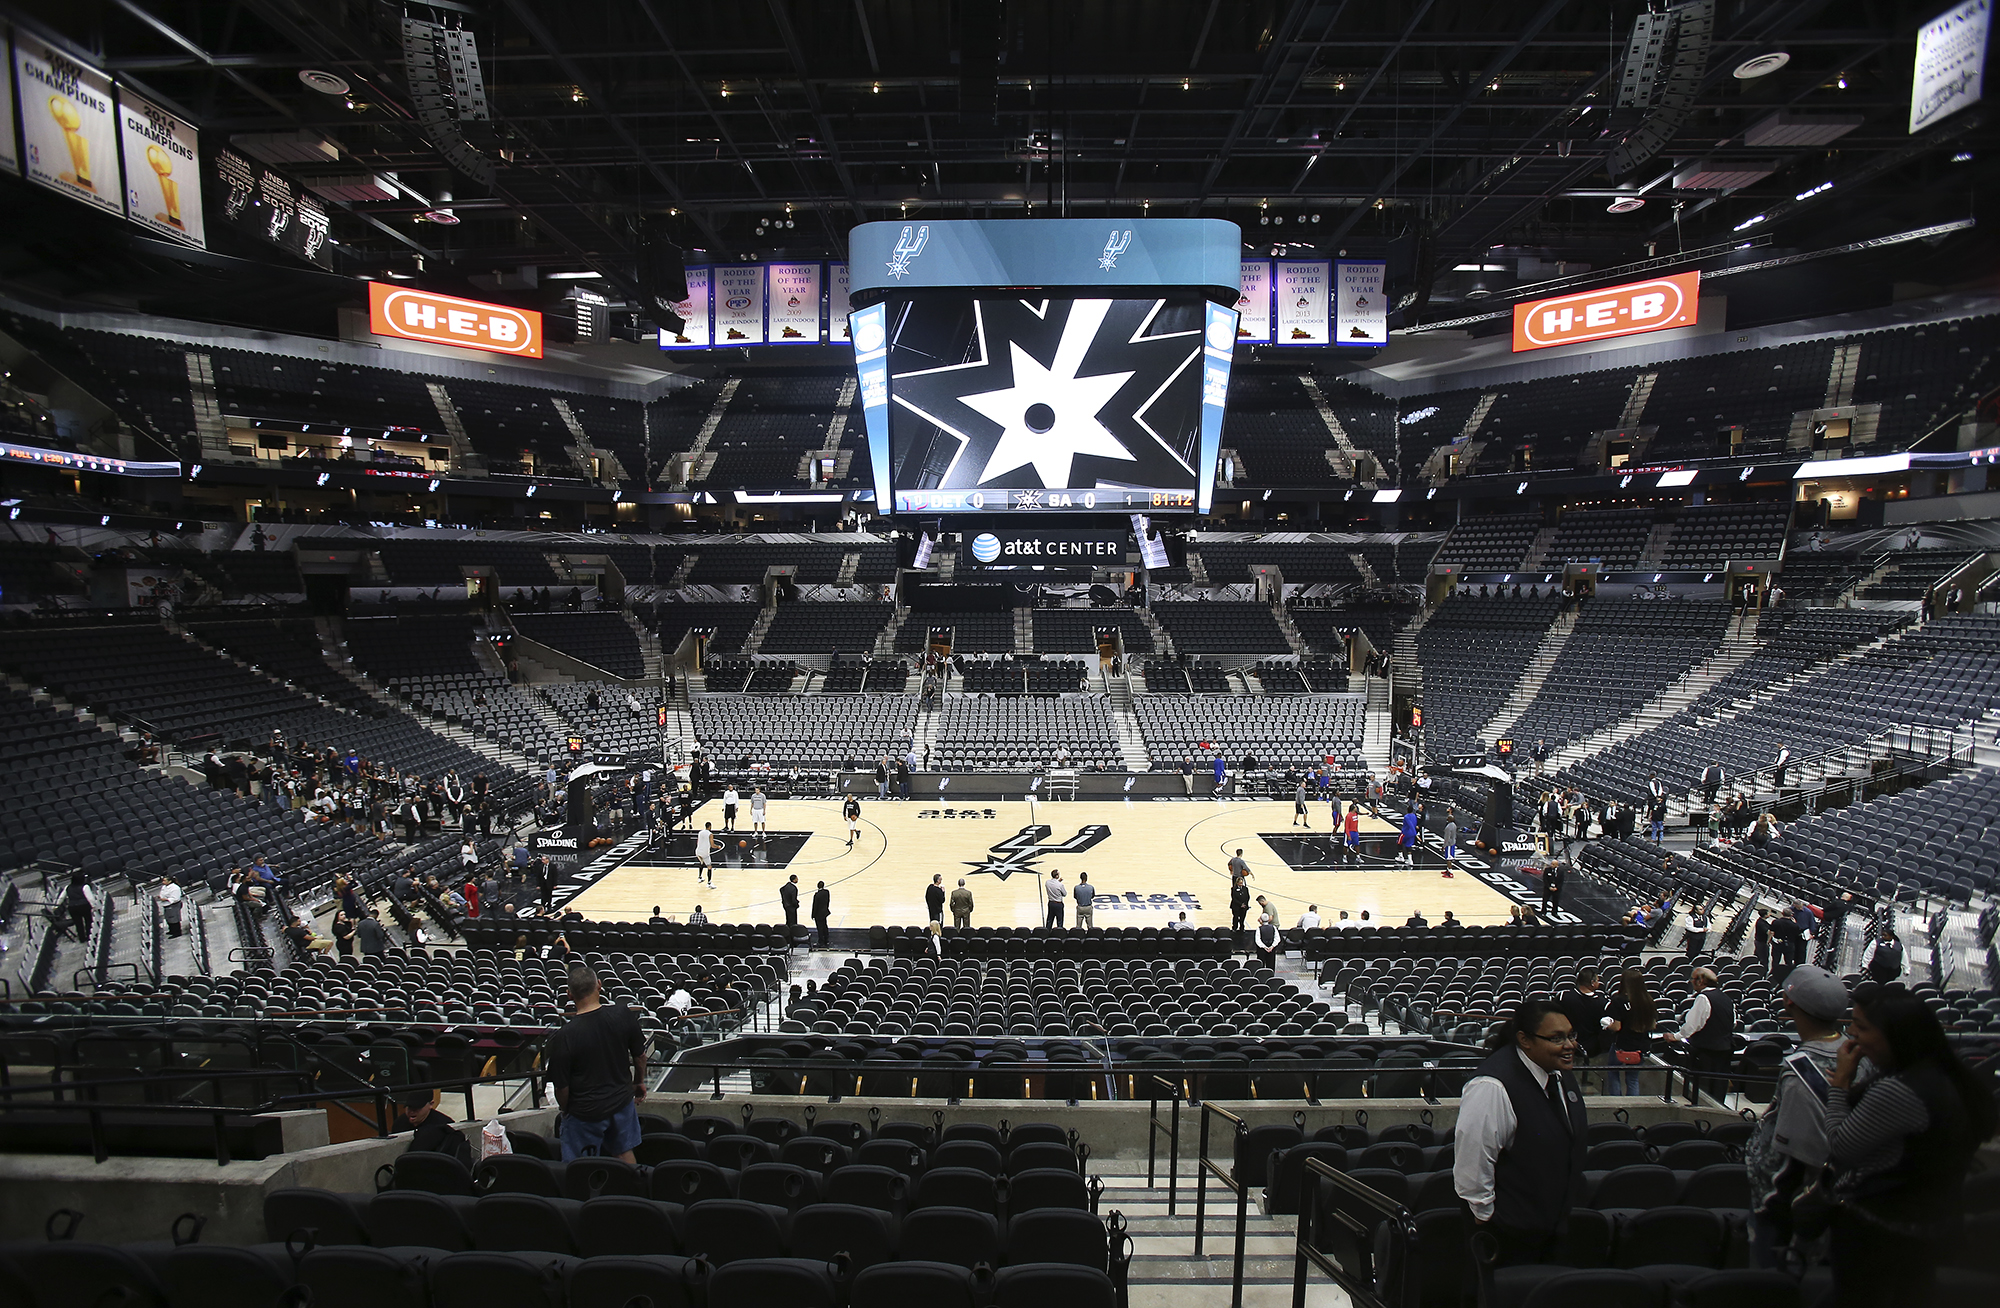 Home of NBA San Antonio Spurs, AT&T Center One AT&T Center …